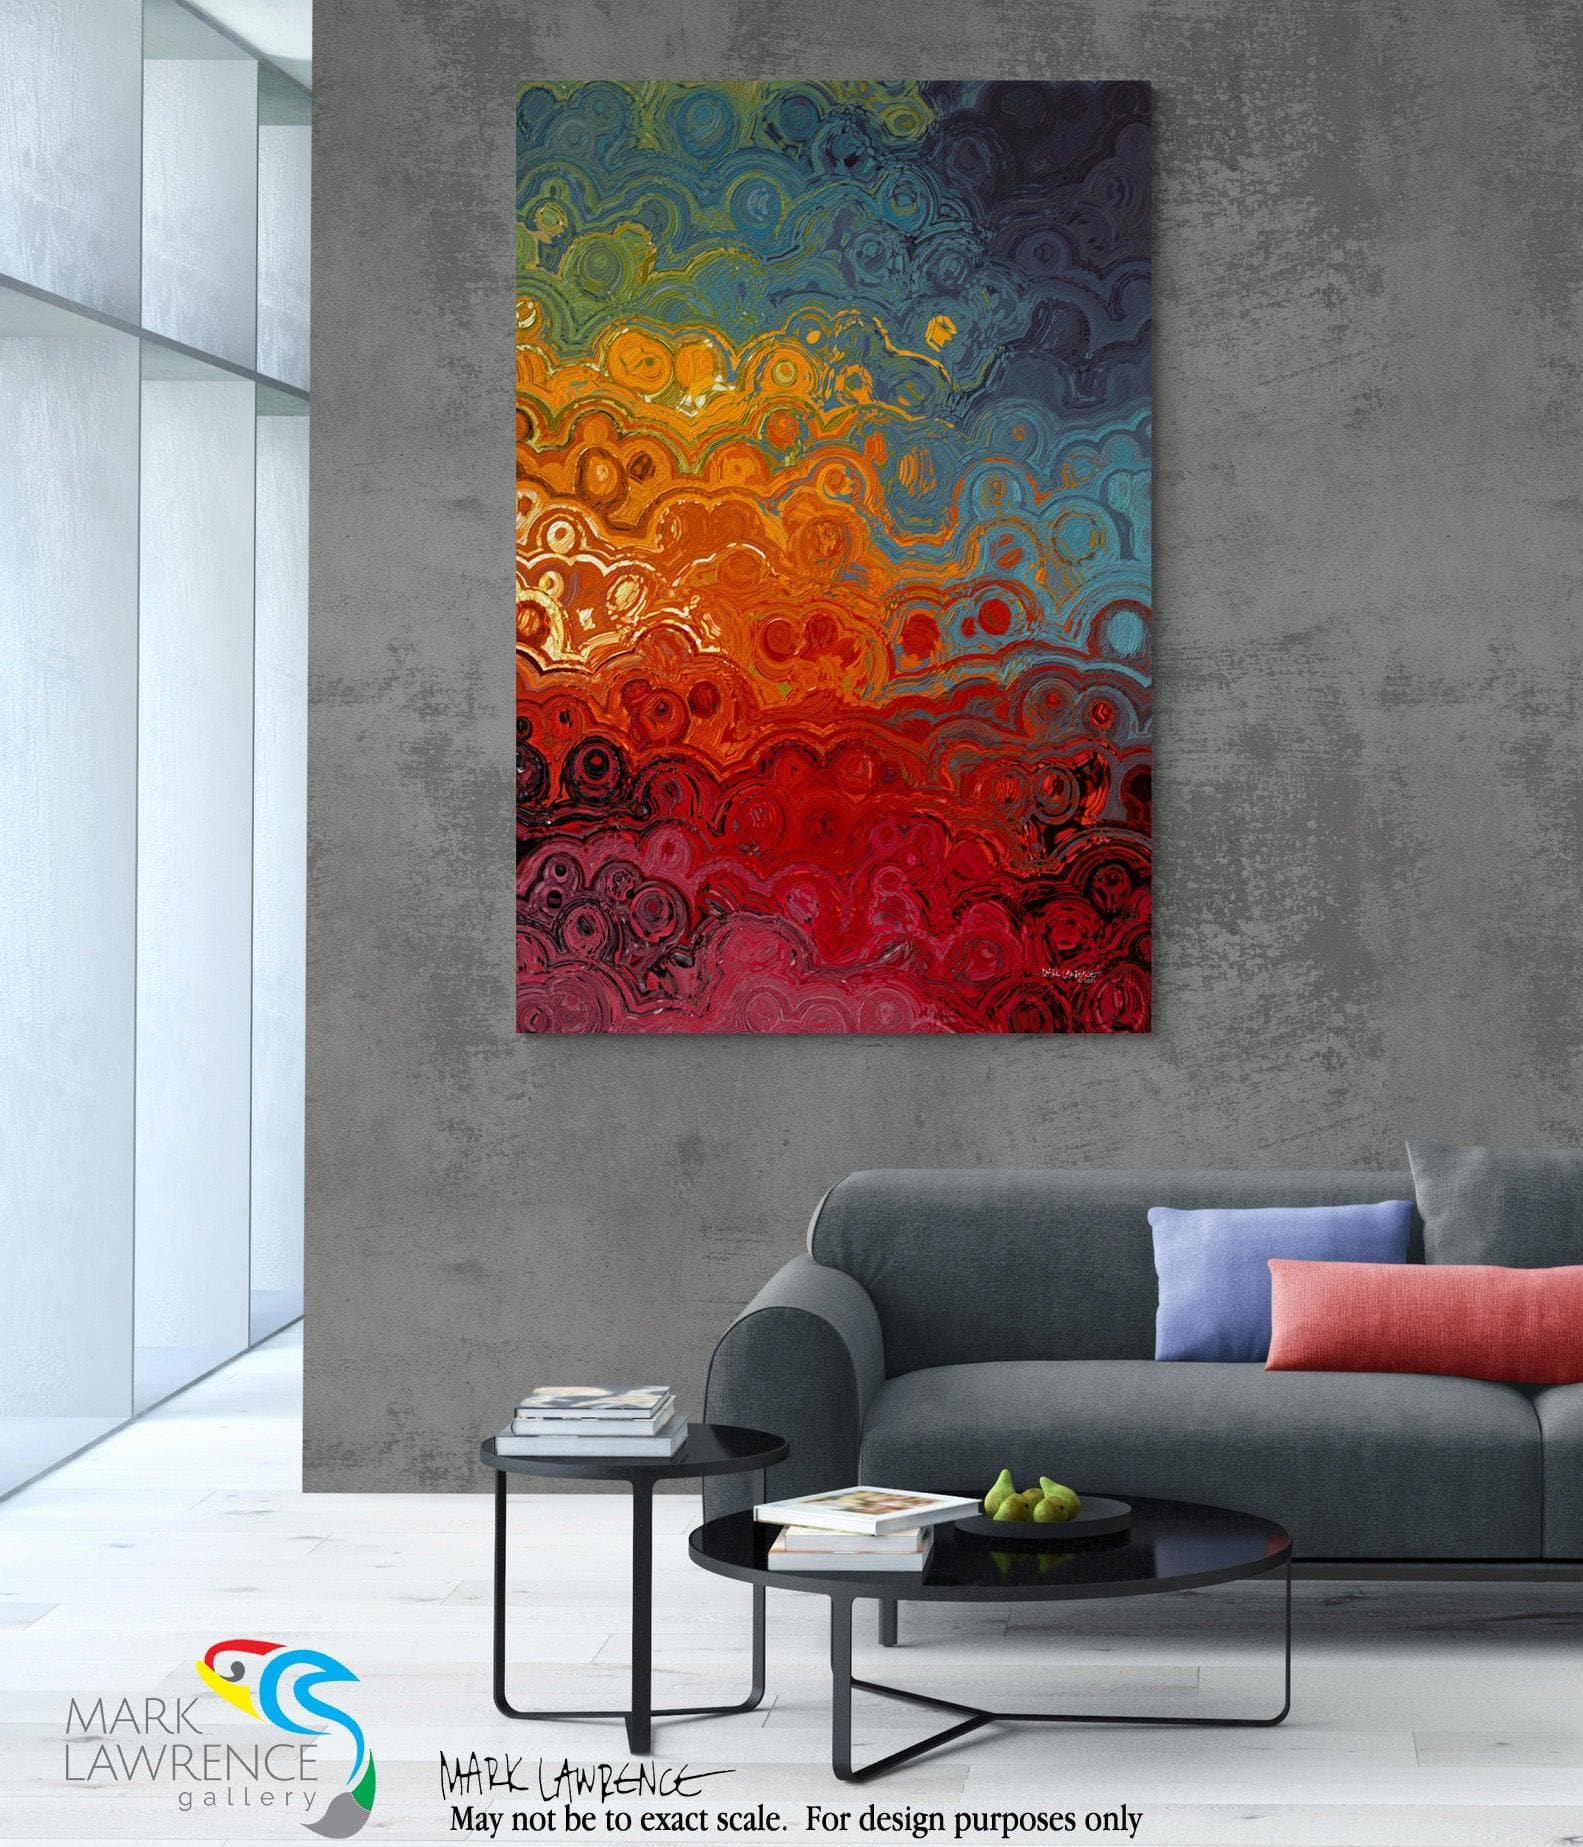 Interior Design Inspiration. Matthew 28:19. Go! Limited Edition Christian Modern Art. Hand embellished and textured with rich brush strokes by the artist. Signed and numbered brightly colored Christian abstract art. Go therefore and make disciples of all the nations, baptizing them in the name of the Father and of the Son and of the Holy Spirit.